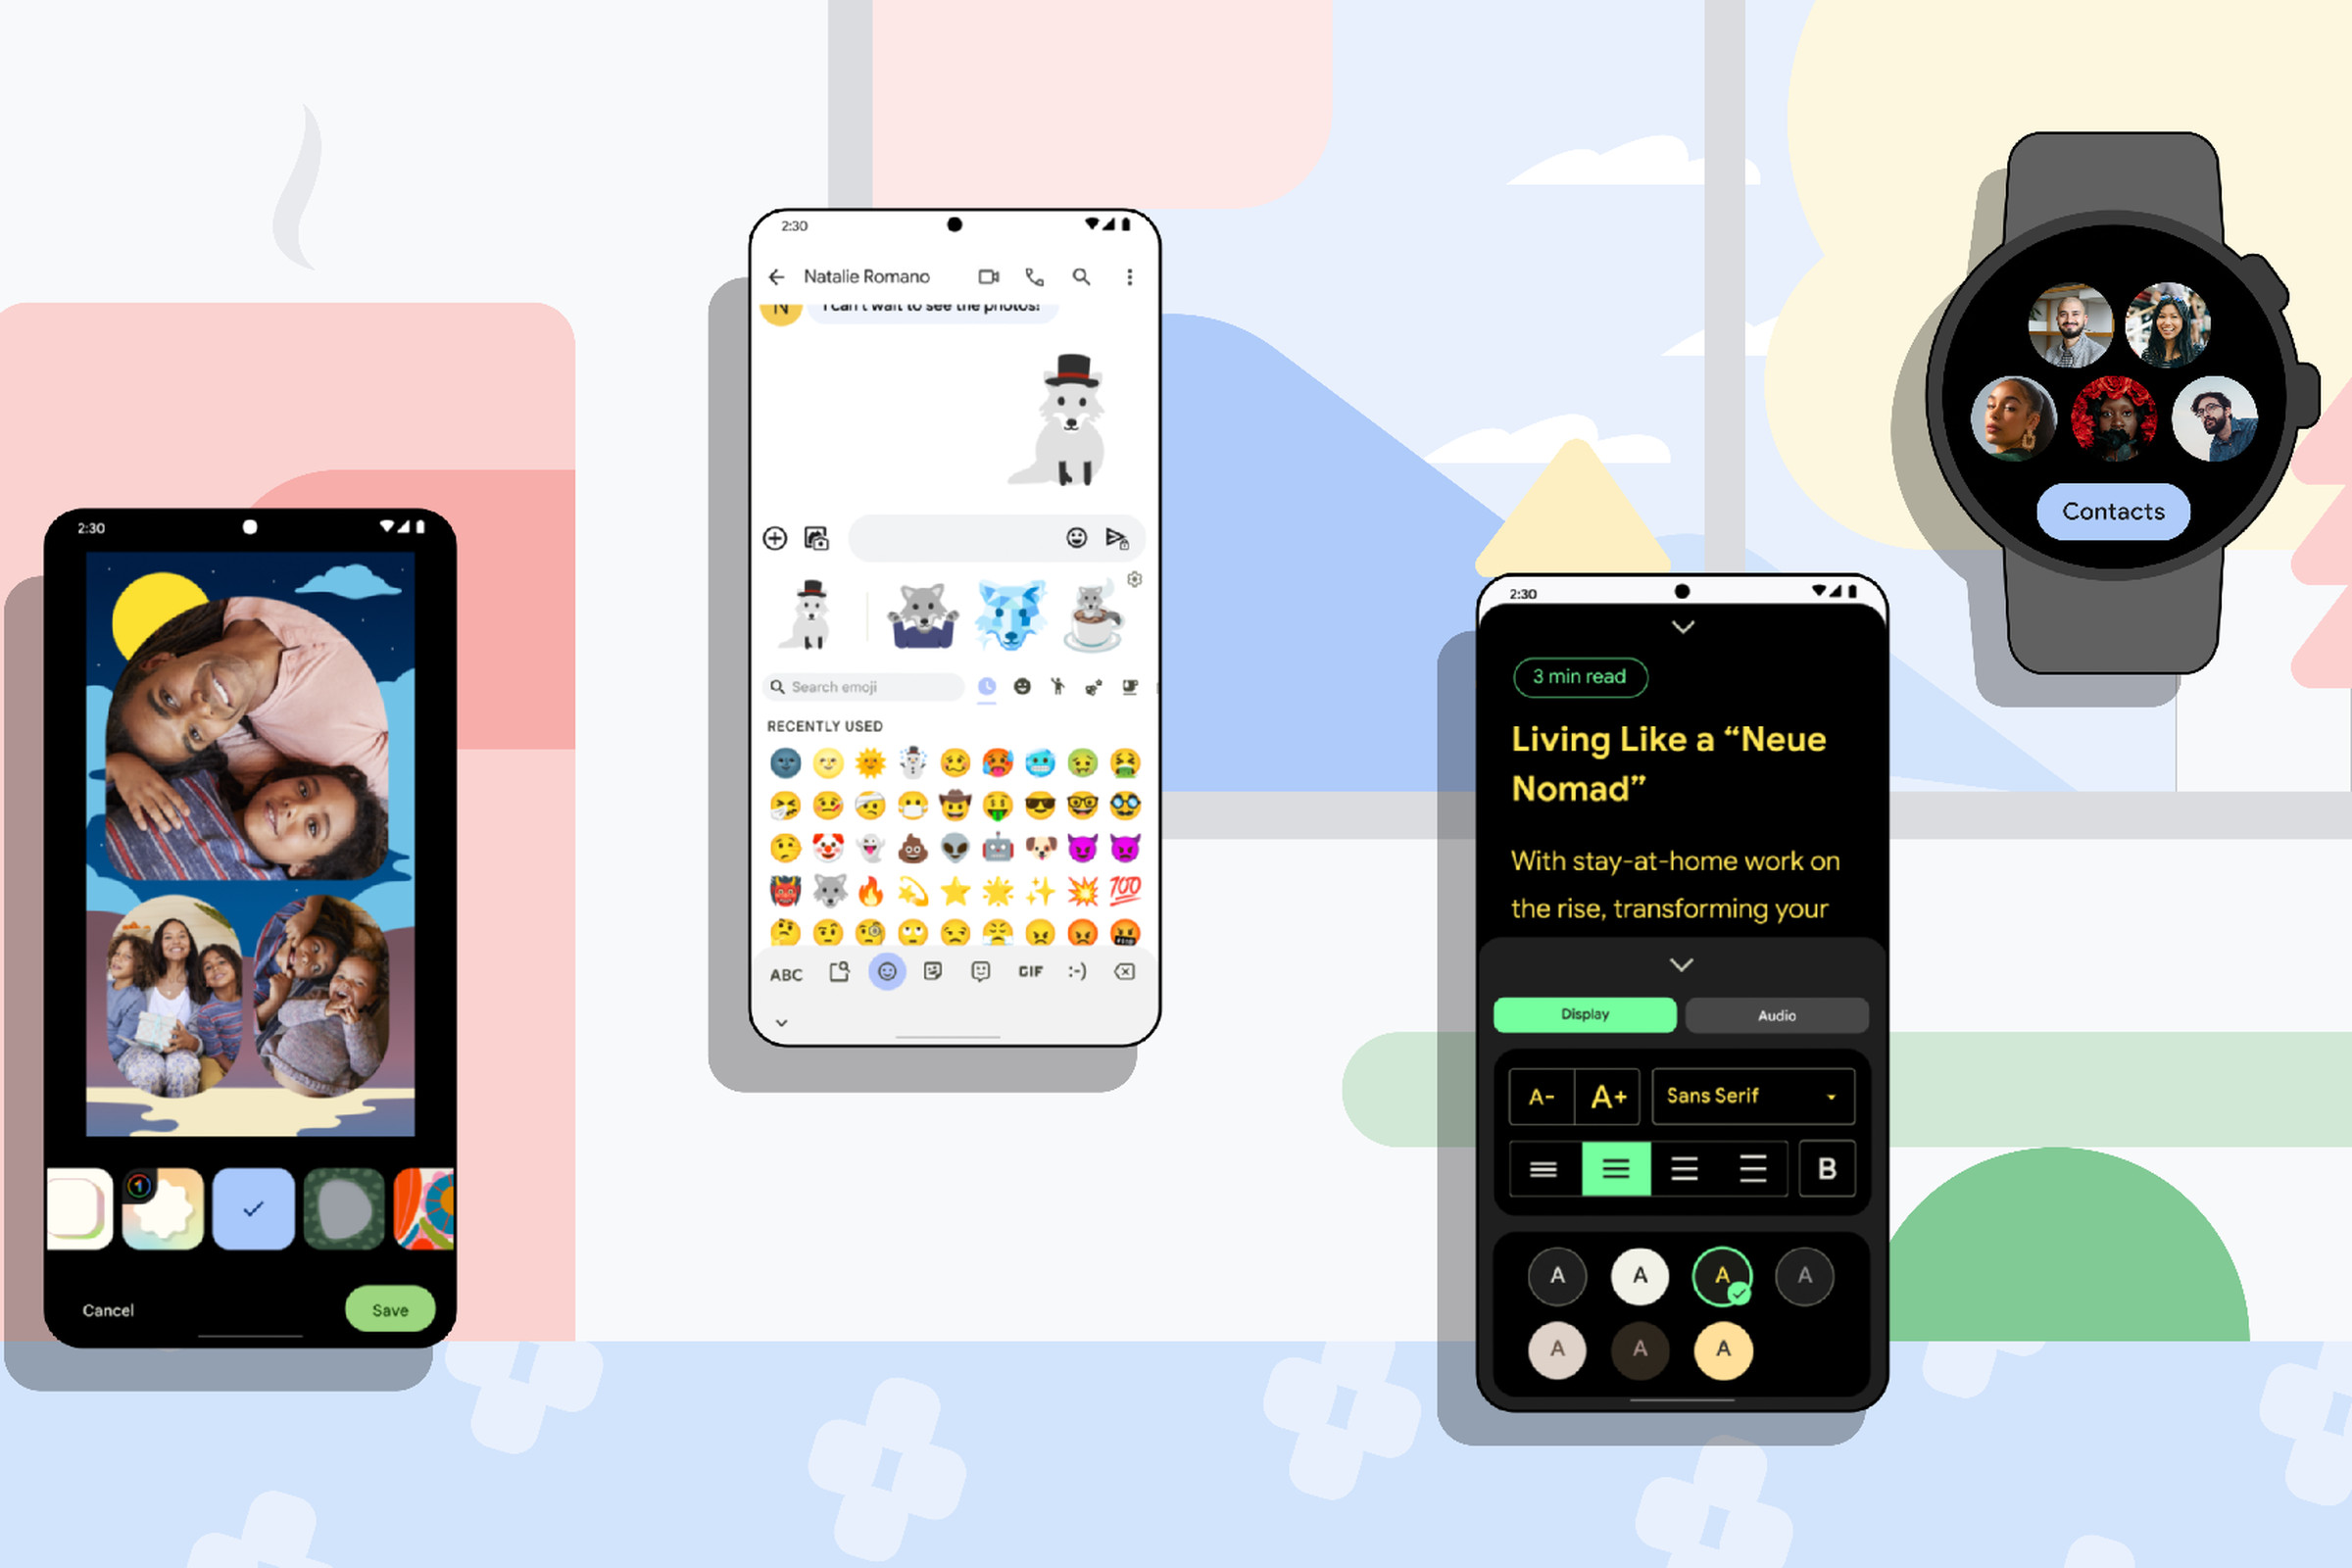 Three mobile devices and a smart watch displaying new Android features against an abstract backdrop.